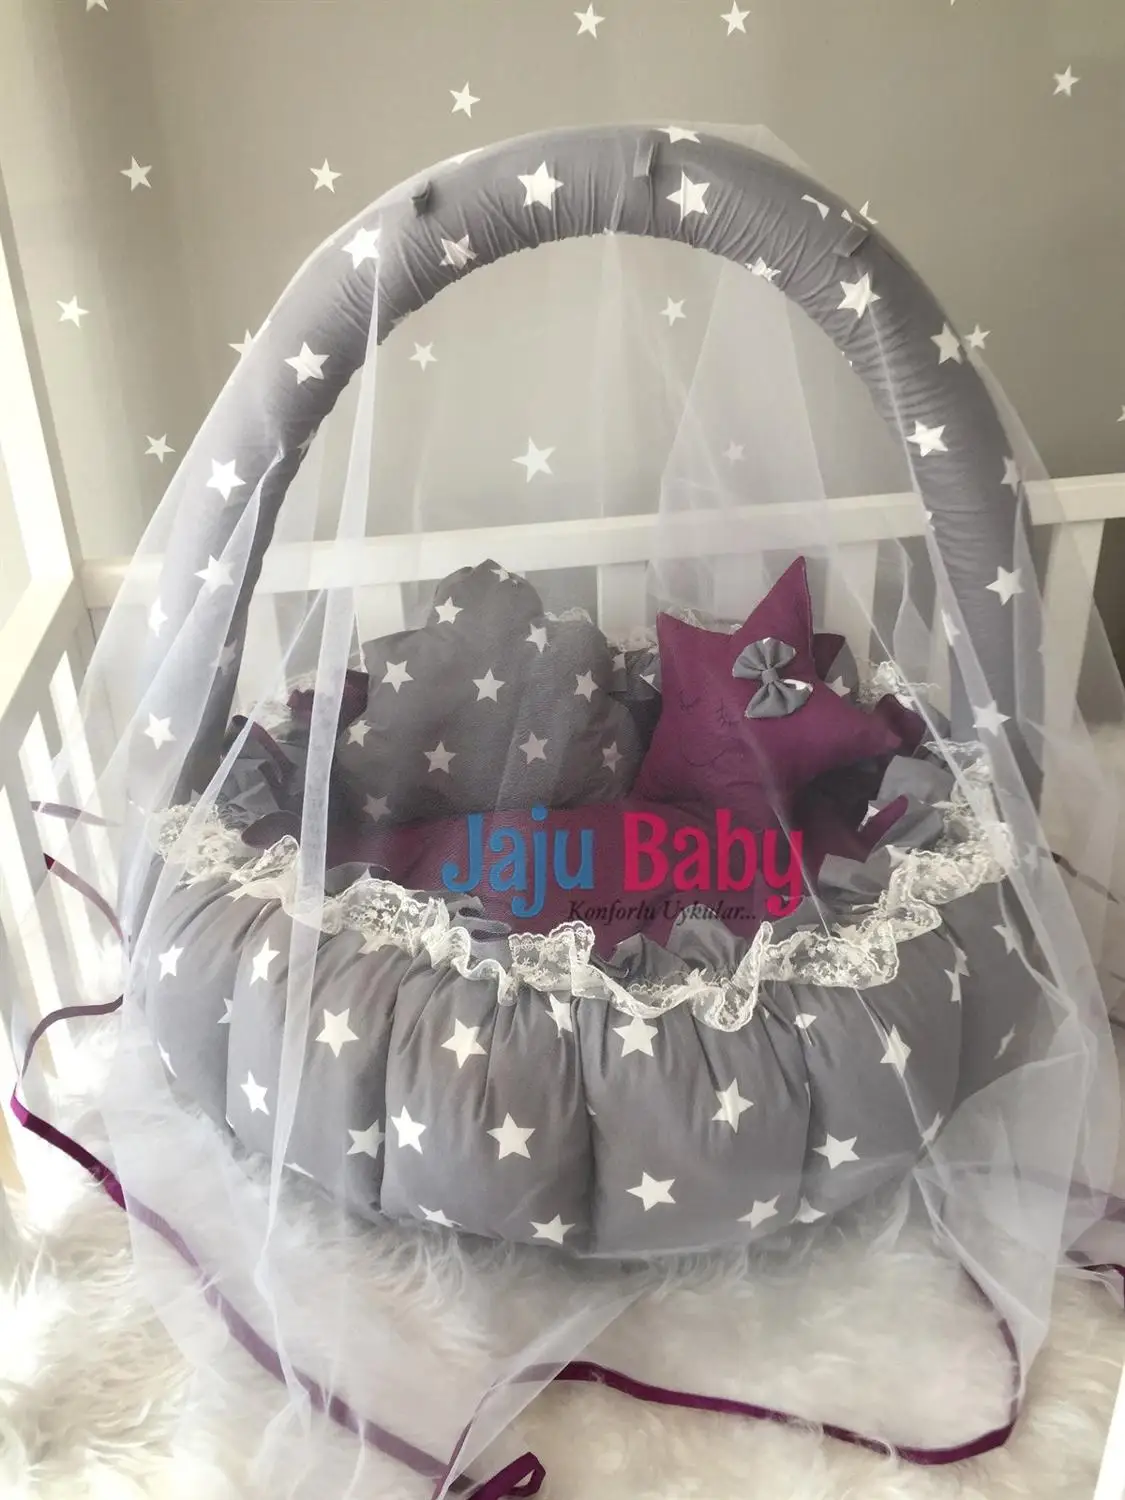 Jaju Baby Gray Star Purple Patterned Design Lux Play Mat Babynest Mosquito Net Tulle Toy Apparatus Set